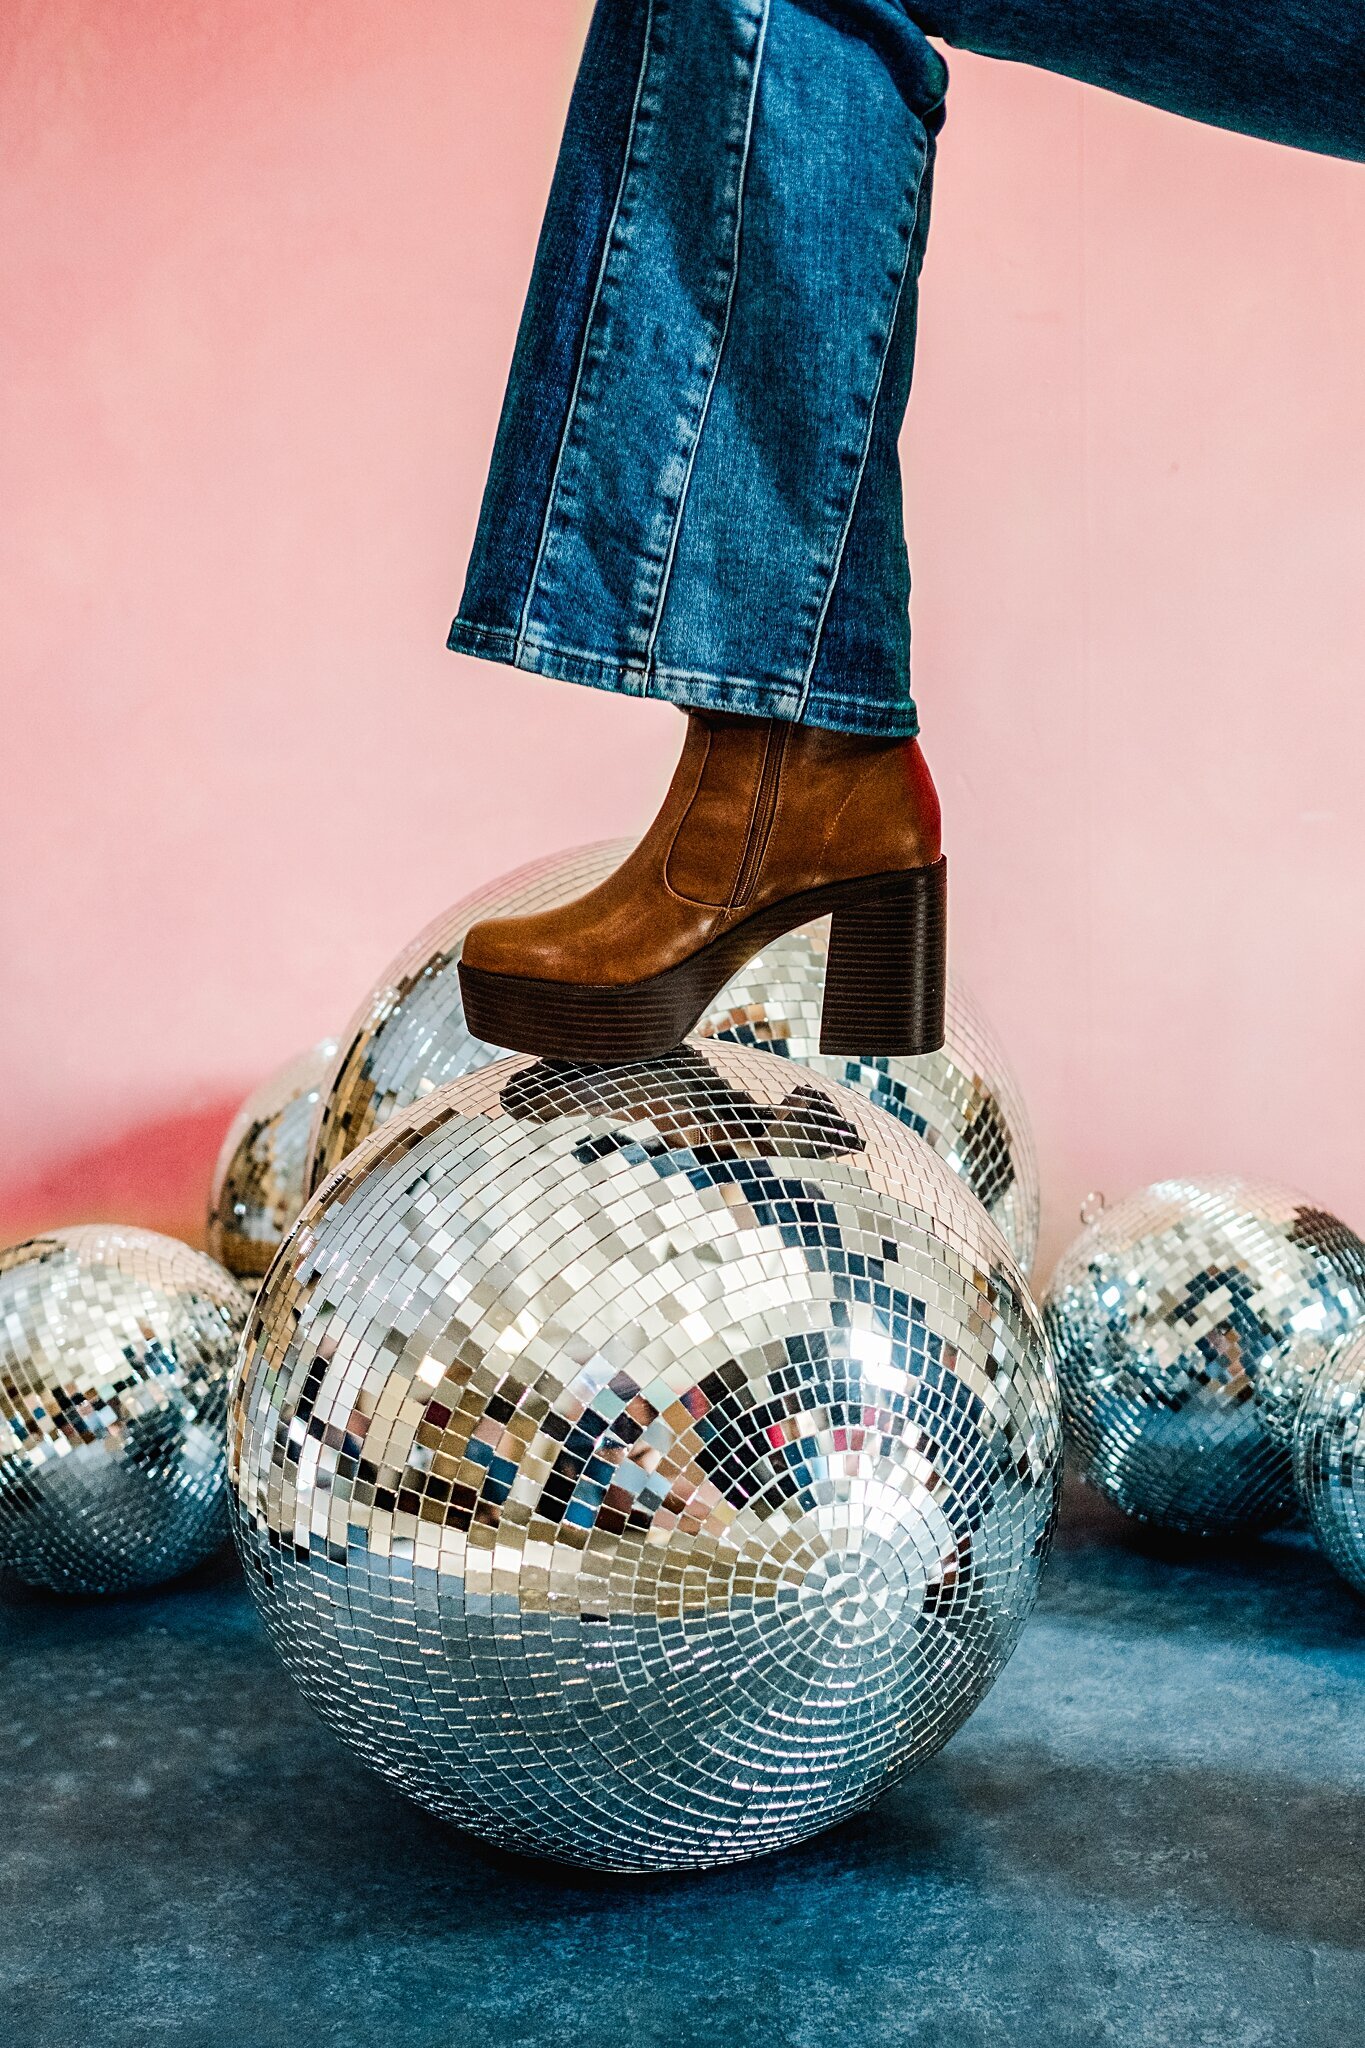 Studio photoshoot with disco balls all over the floor and a 70's retro boot stomping on one disco ball